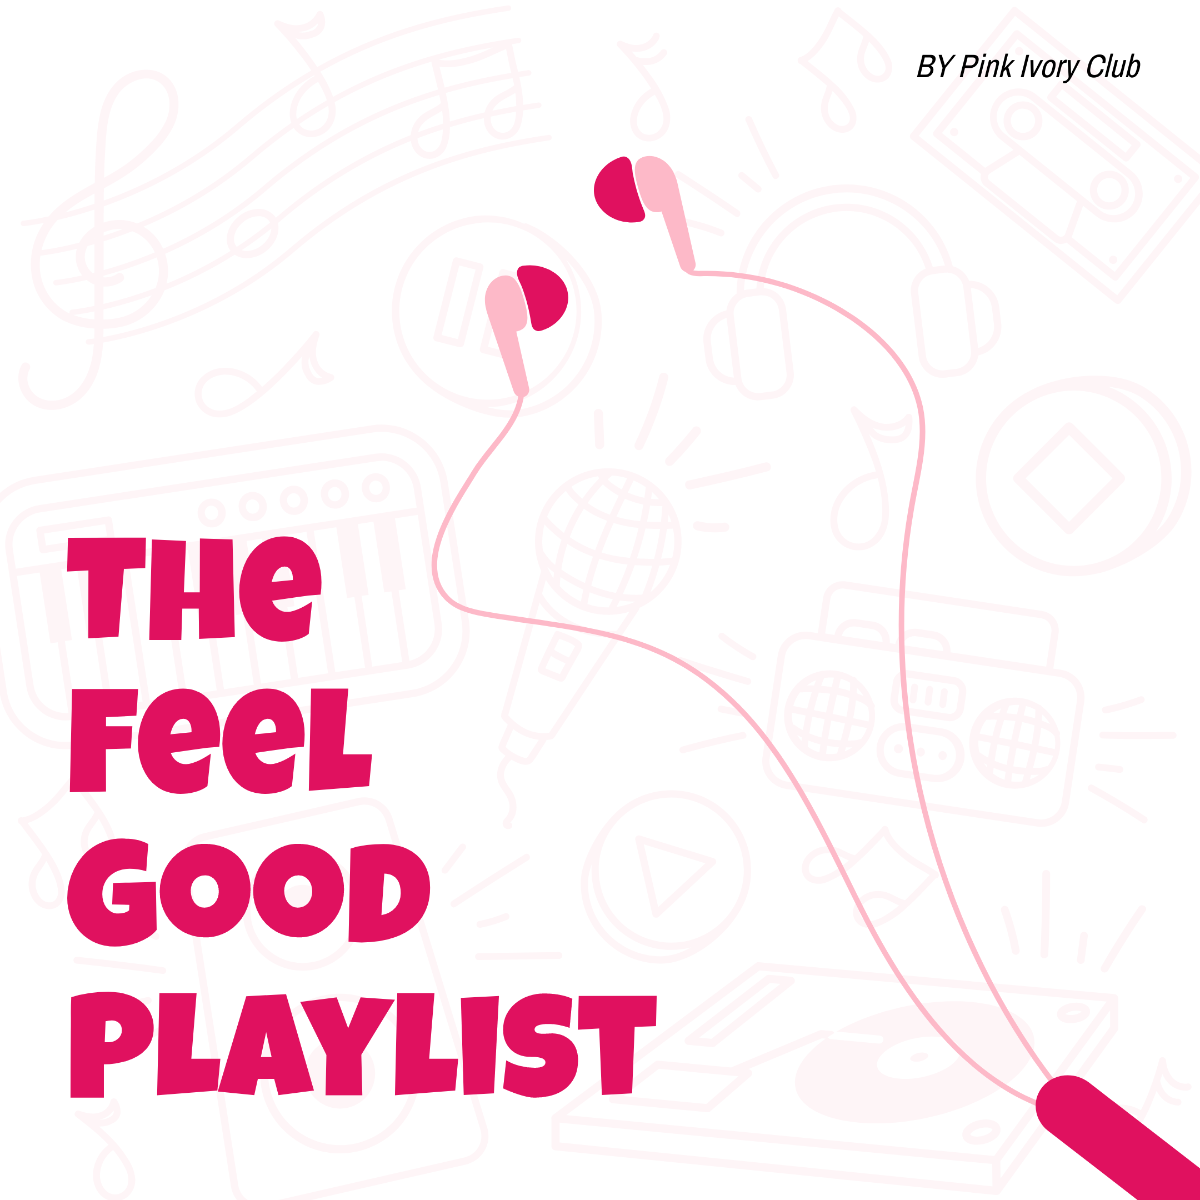 Funny Playlist Cover Template